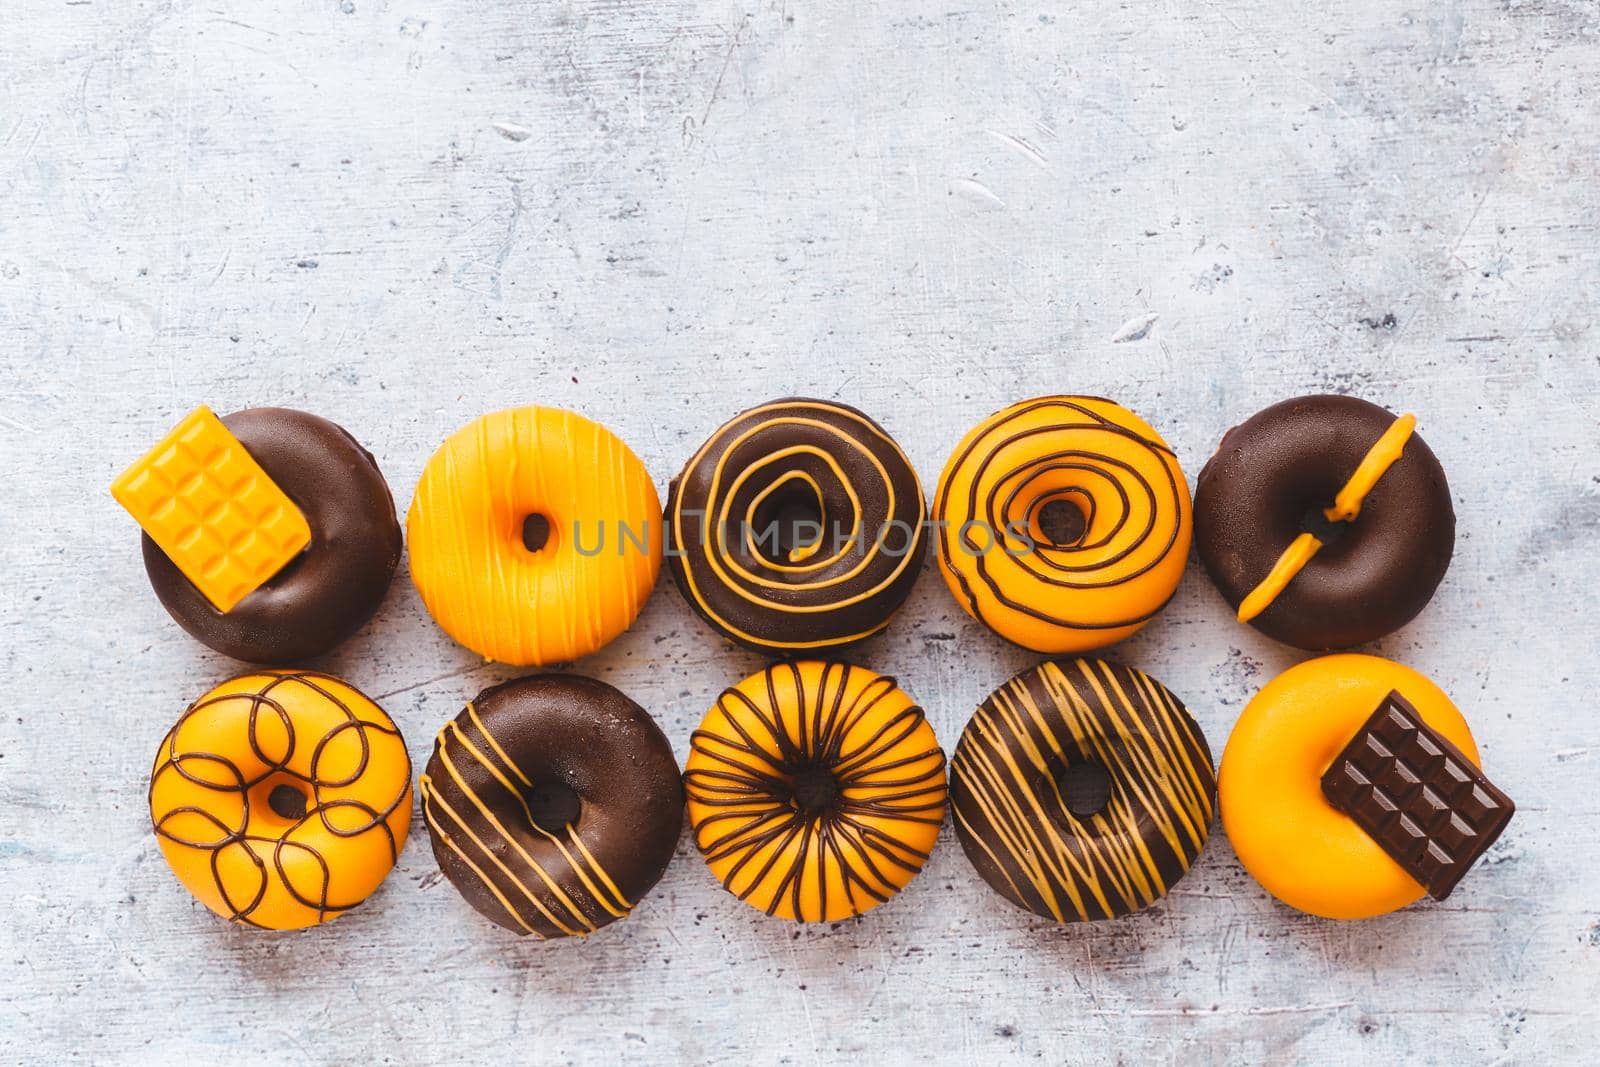 Homemade Orange  And Yellow Glazed Chocolate Donuts  On Rustic Gray Background. Top view, blank space